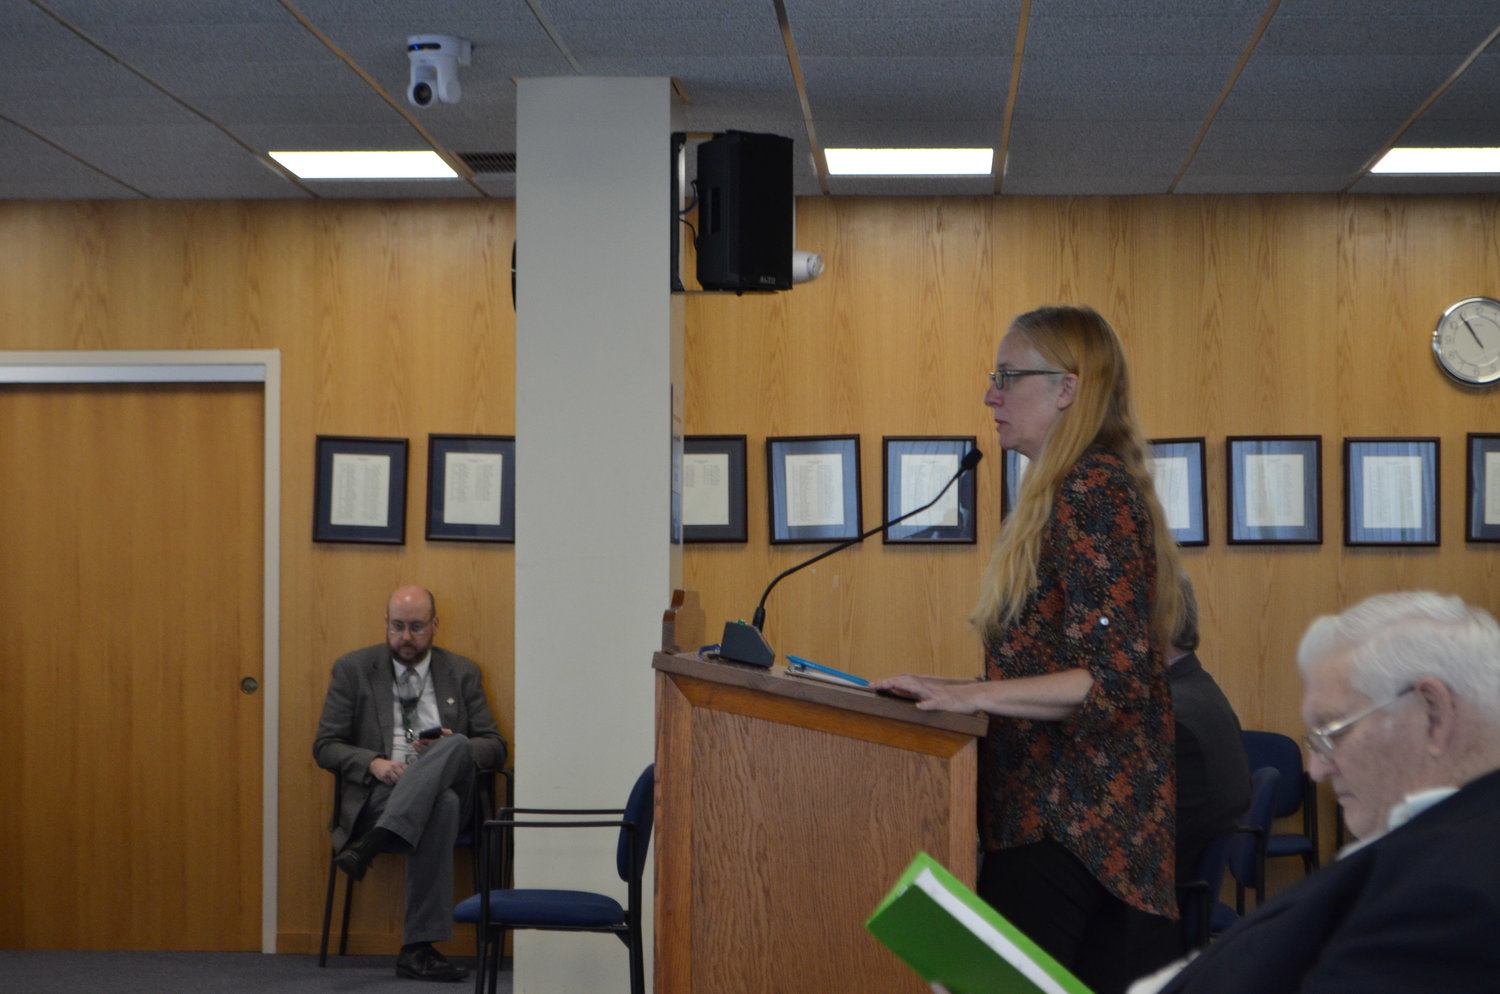 Jill Weyer, deputy commissioner of the Sullivan County Division of Planning, Community Development and Real Property, provided updates on the Community Development Block Grant project that department administered.